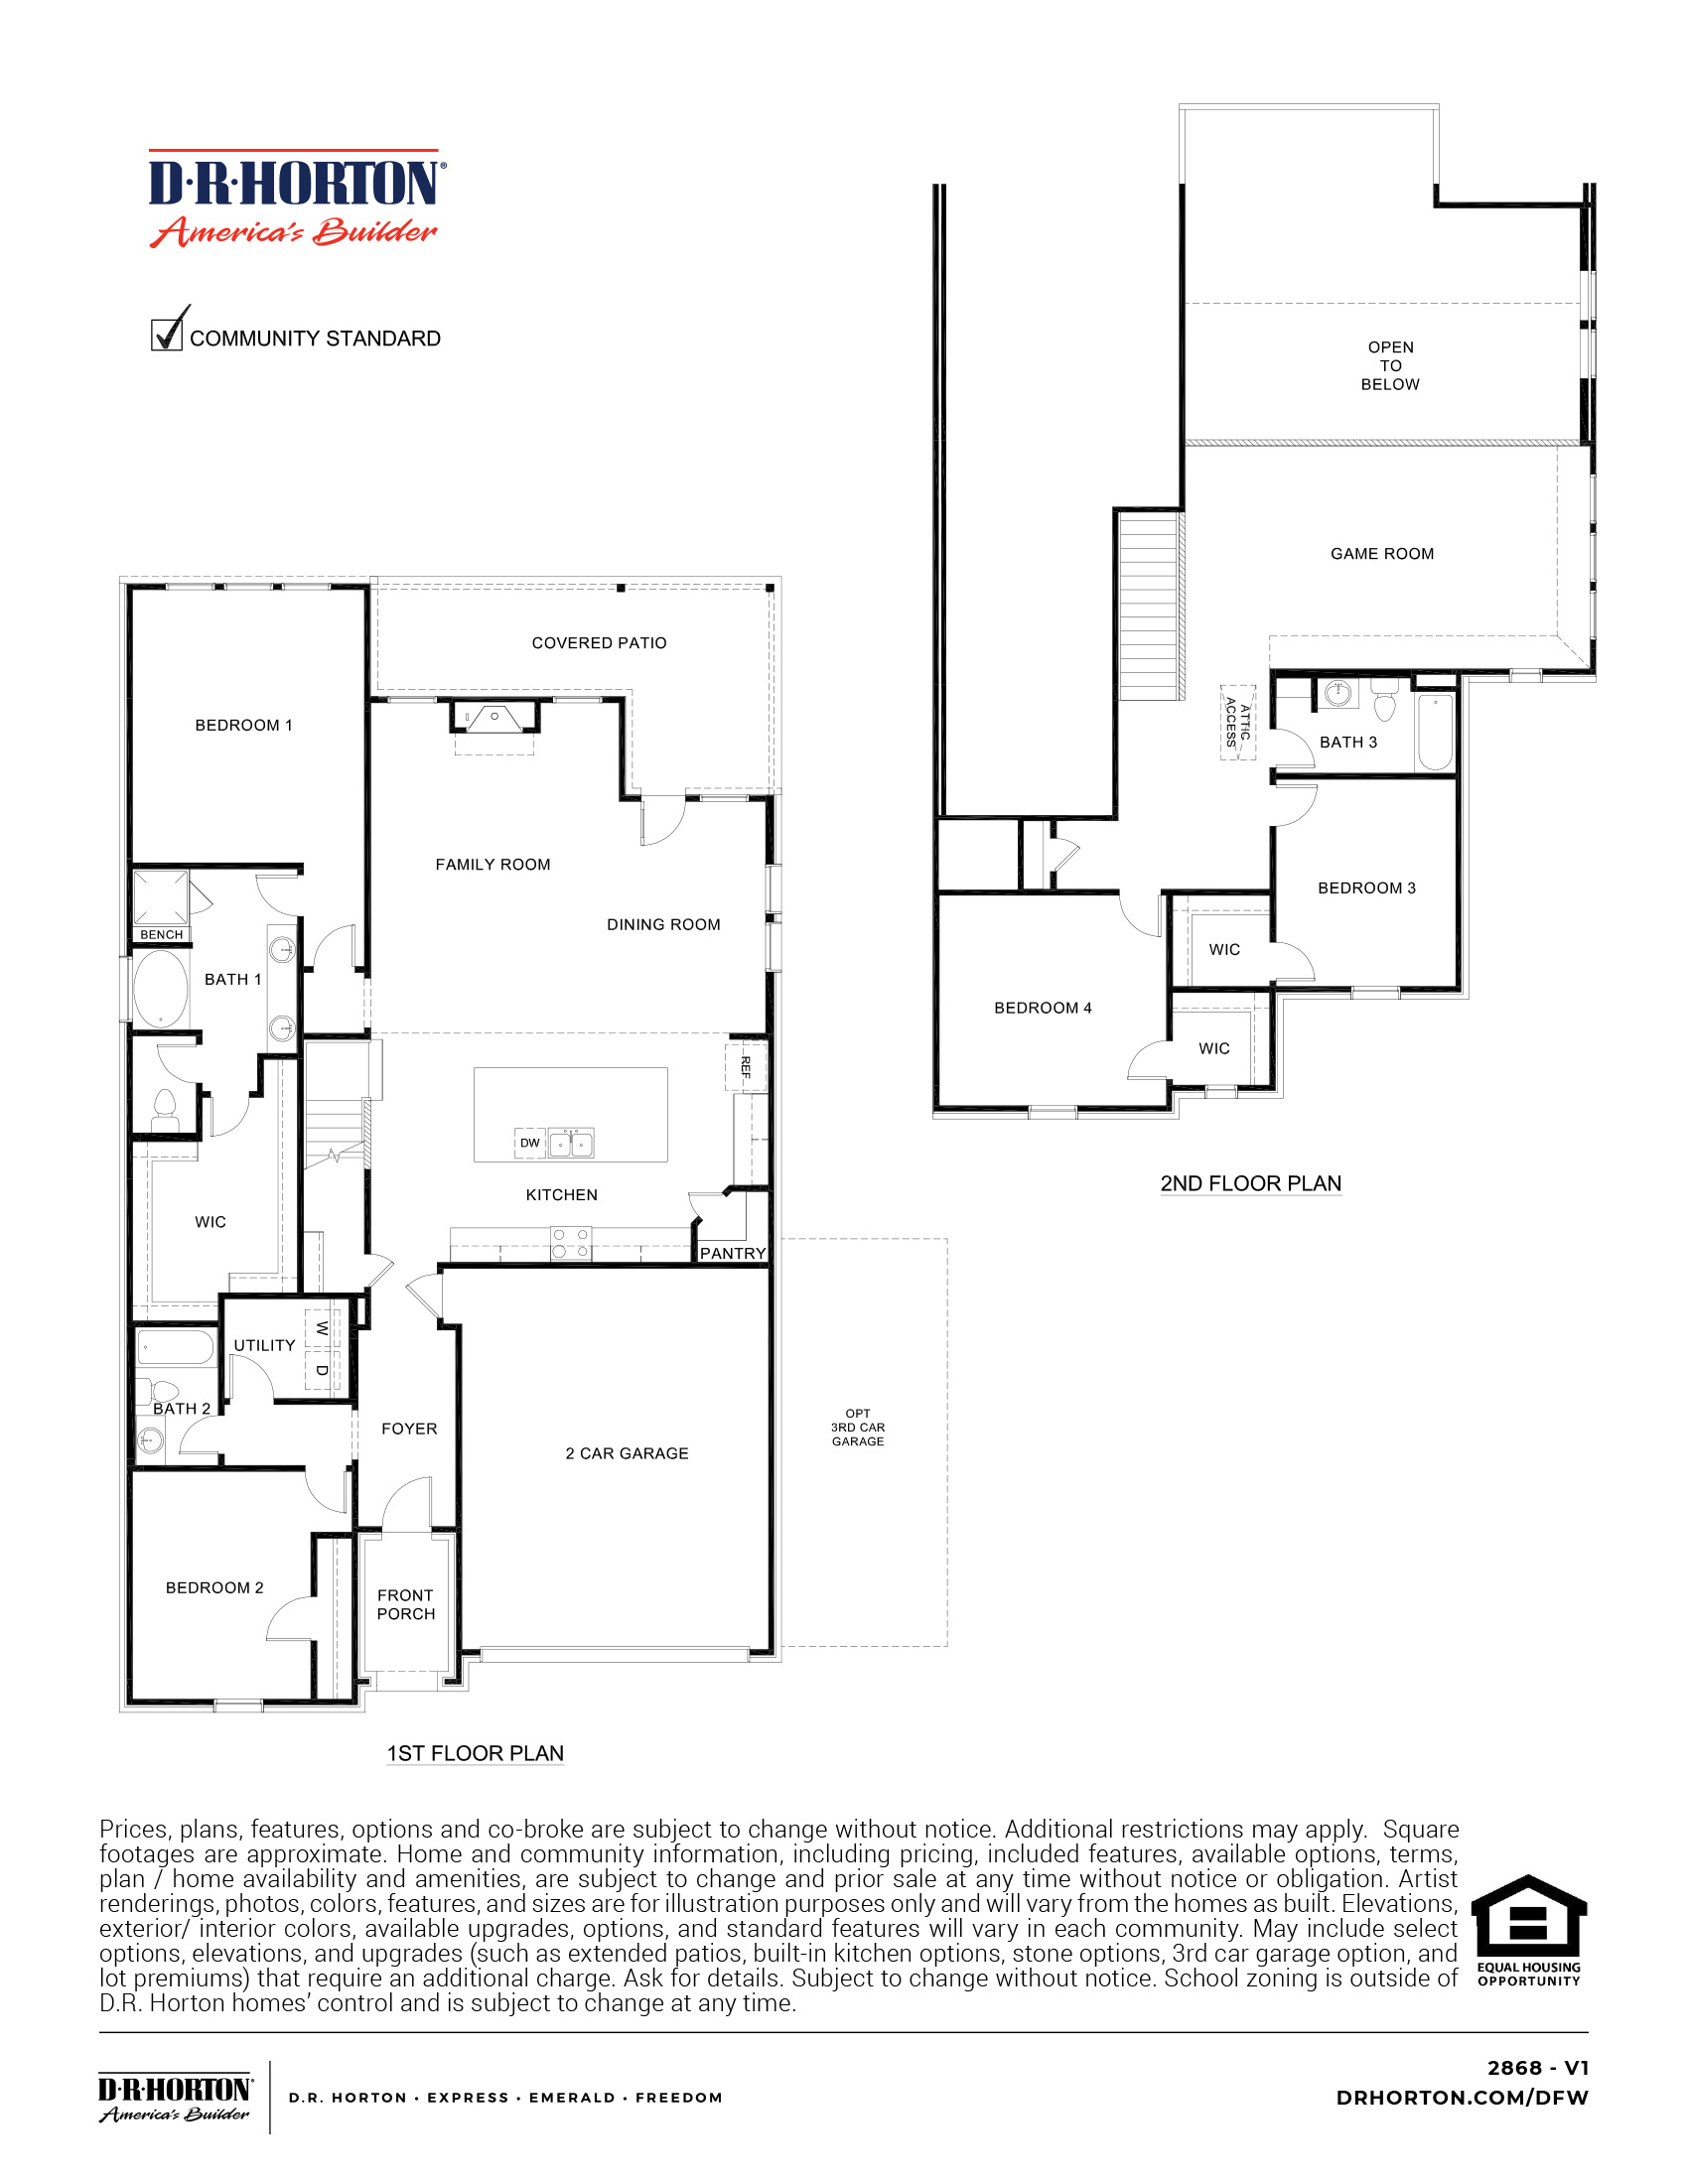 2868 Englewood floorplan rendering - the Woods at Lindsey Place in Anna TX